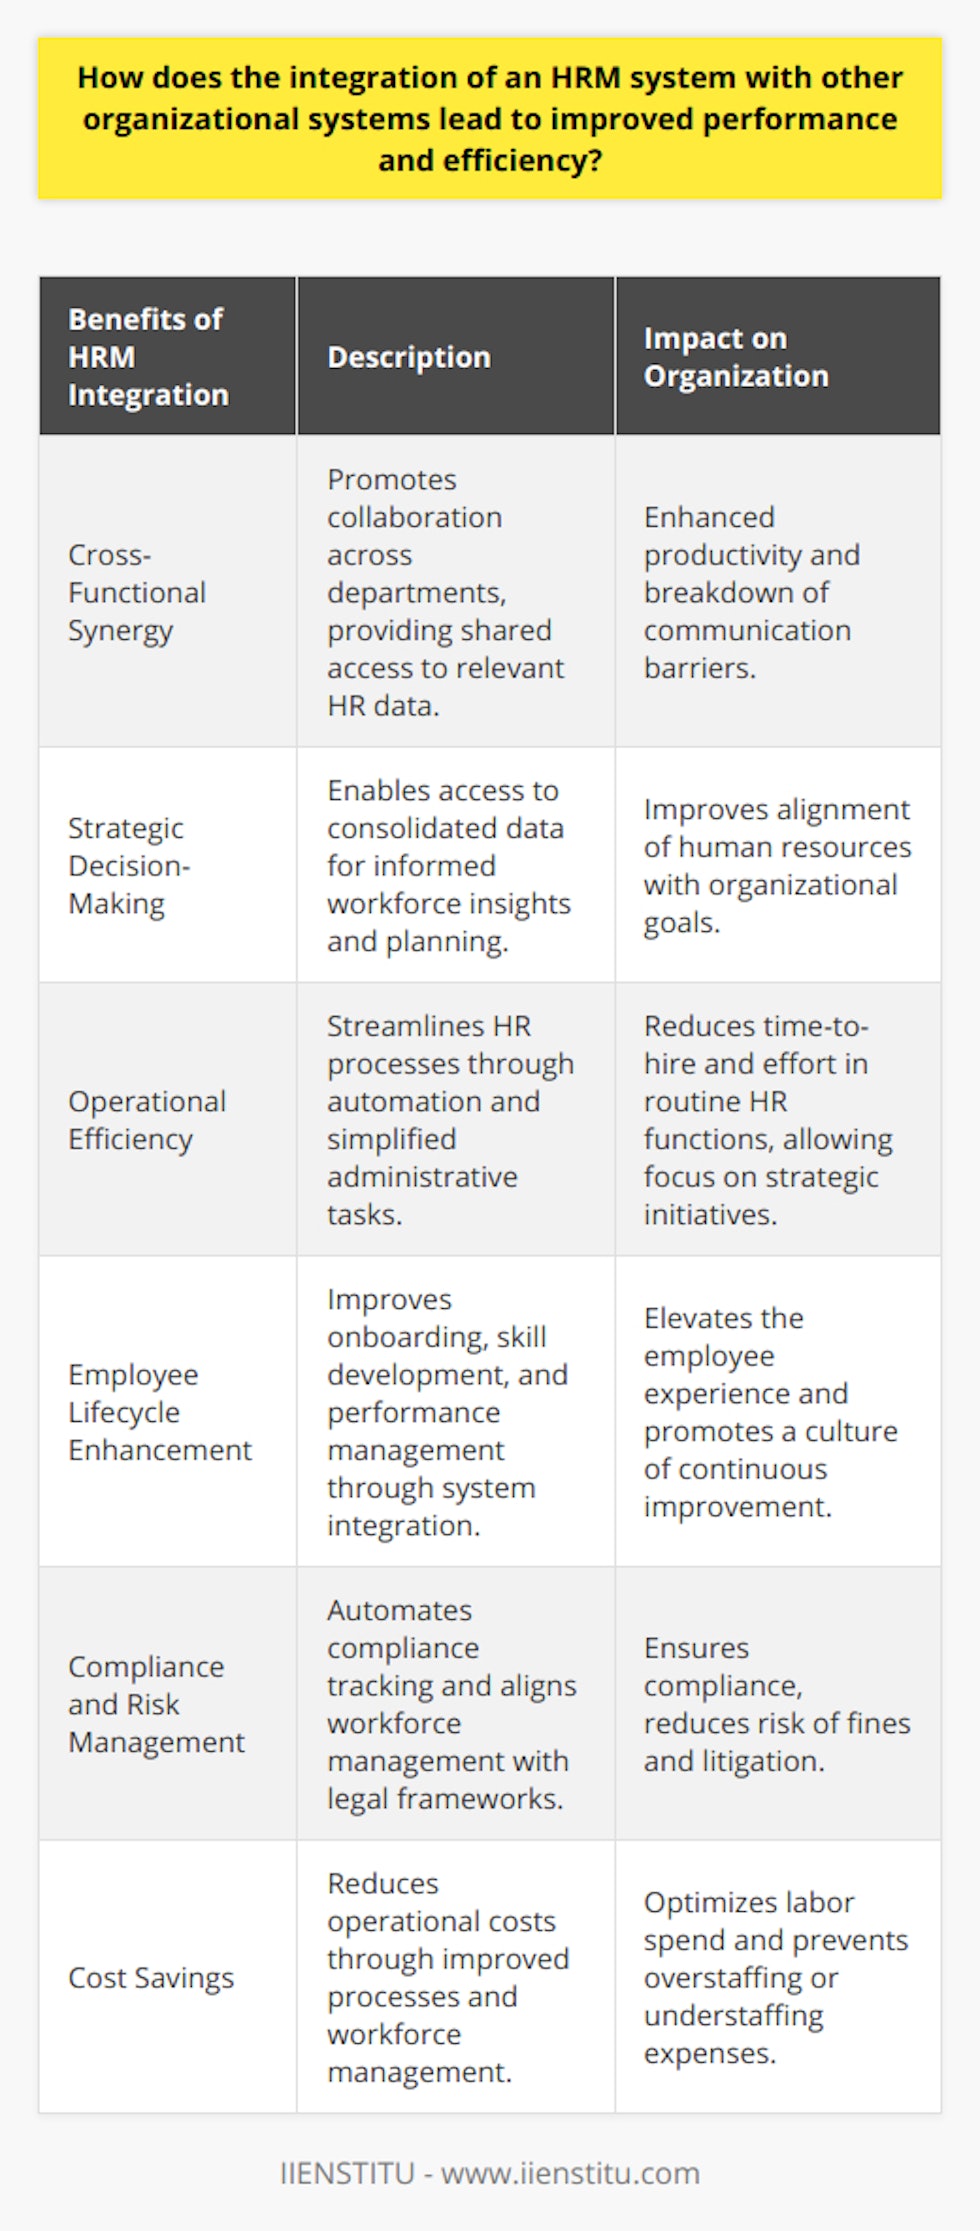 Integrating a Human Resources Management (HRM) system with other systems within an organization can profoundly impact the efficiency and performance of the company. When implemented strategically, this alignment of systems fosters an ecosystem of shared information and streamlined processes that pave the way for growth and success.Cross-Functional Synergy:One of the significant advantages of integrating HRM systems with other systems is the promotion of synergy across different functions within the organization. Communication barriers are dismantled as relevant HR data becomes accessible to various departments, such as finance for payroll processing or operations for workforce planning. This interconnected approach facilitates collaborative projects and initiatives, breaking down silos and enhancing overall productivity.Strategic Decision-Making:An integrated system also serves as a springboard for strategic decision-making. With unified data from HRM and other systems, such as Customer Relationship Management (CRM) or Enterprise Resource Planning (ERP), leadership can draw meaningful insights regarding workforce trends, skills gaps, and organizational capacity. This depth of information supports strategic business decisions that align human resources with long-term goals, sharpening competitive edge and driving corporate success.Operational Efficiency:From a day-to-day operational standpoint, integration simplifies several HR functions. For instance, the recruitment process becomes more efficient when HRM systems seamlessly interact with applicant tracking systems. It speeds up candidate evaluation and reduces time-to-hire. Similarly, linking the HRM system with time management tools simplifies attendance tracking and leave management, reducing the effort spent on routine administrative tasks and allowing HR personnel to focus on more critical strategic initiatives.Employee Lifecycle Enhancement:The employee experience is critically enhanced through the HRM system integration. Onboarding experiences improve as new hires encounter a seamless flow from recruitment to initial training—integrating Learning Management Systems (LMS) aids in identifying skills gaps and deploying necessary training while tracking progress and outcomes. Performance management systems integration ensures that performance reviews are data-driven and contribute to a meaningful appraisal process, reinforcing a culture of continuous improvement.Compliance and Risk Management:An HRM system integrated with compliance management tools is instrumental in mitigating risk. It enables the harmonization of changing legal frameworks with company policies and workforce management. Integrated HRM systems can automate the tracking of compliance training, certifications, and regulatory reporting. Such thorough oversight ensures organizations remain ahead of compliance requirements, reducing the likelihood of costly litigation or fines.Cost Savings:Last but not least, an integrated system can yield significant cost savings. Through the elimination of data inconsistencies and the reduction of manual processes, companies can lower their operational costs. Additionally, through more informed workforce planning and talent management, organizations can optimize their labor spend, ensure efficient talent utilization, and avoid the excess costs associated with under or overstaffing.Ultimately, integrating an HRM system with other organizational platforms can transform the role of HR from administrative-centric to strategic-centric. It strengthens the foundation for informed decision-making, operational excellence, and an agile workforce that is responsive to the dynamic needs of a competitive business landscape.